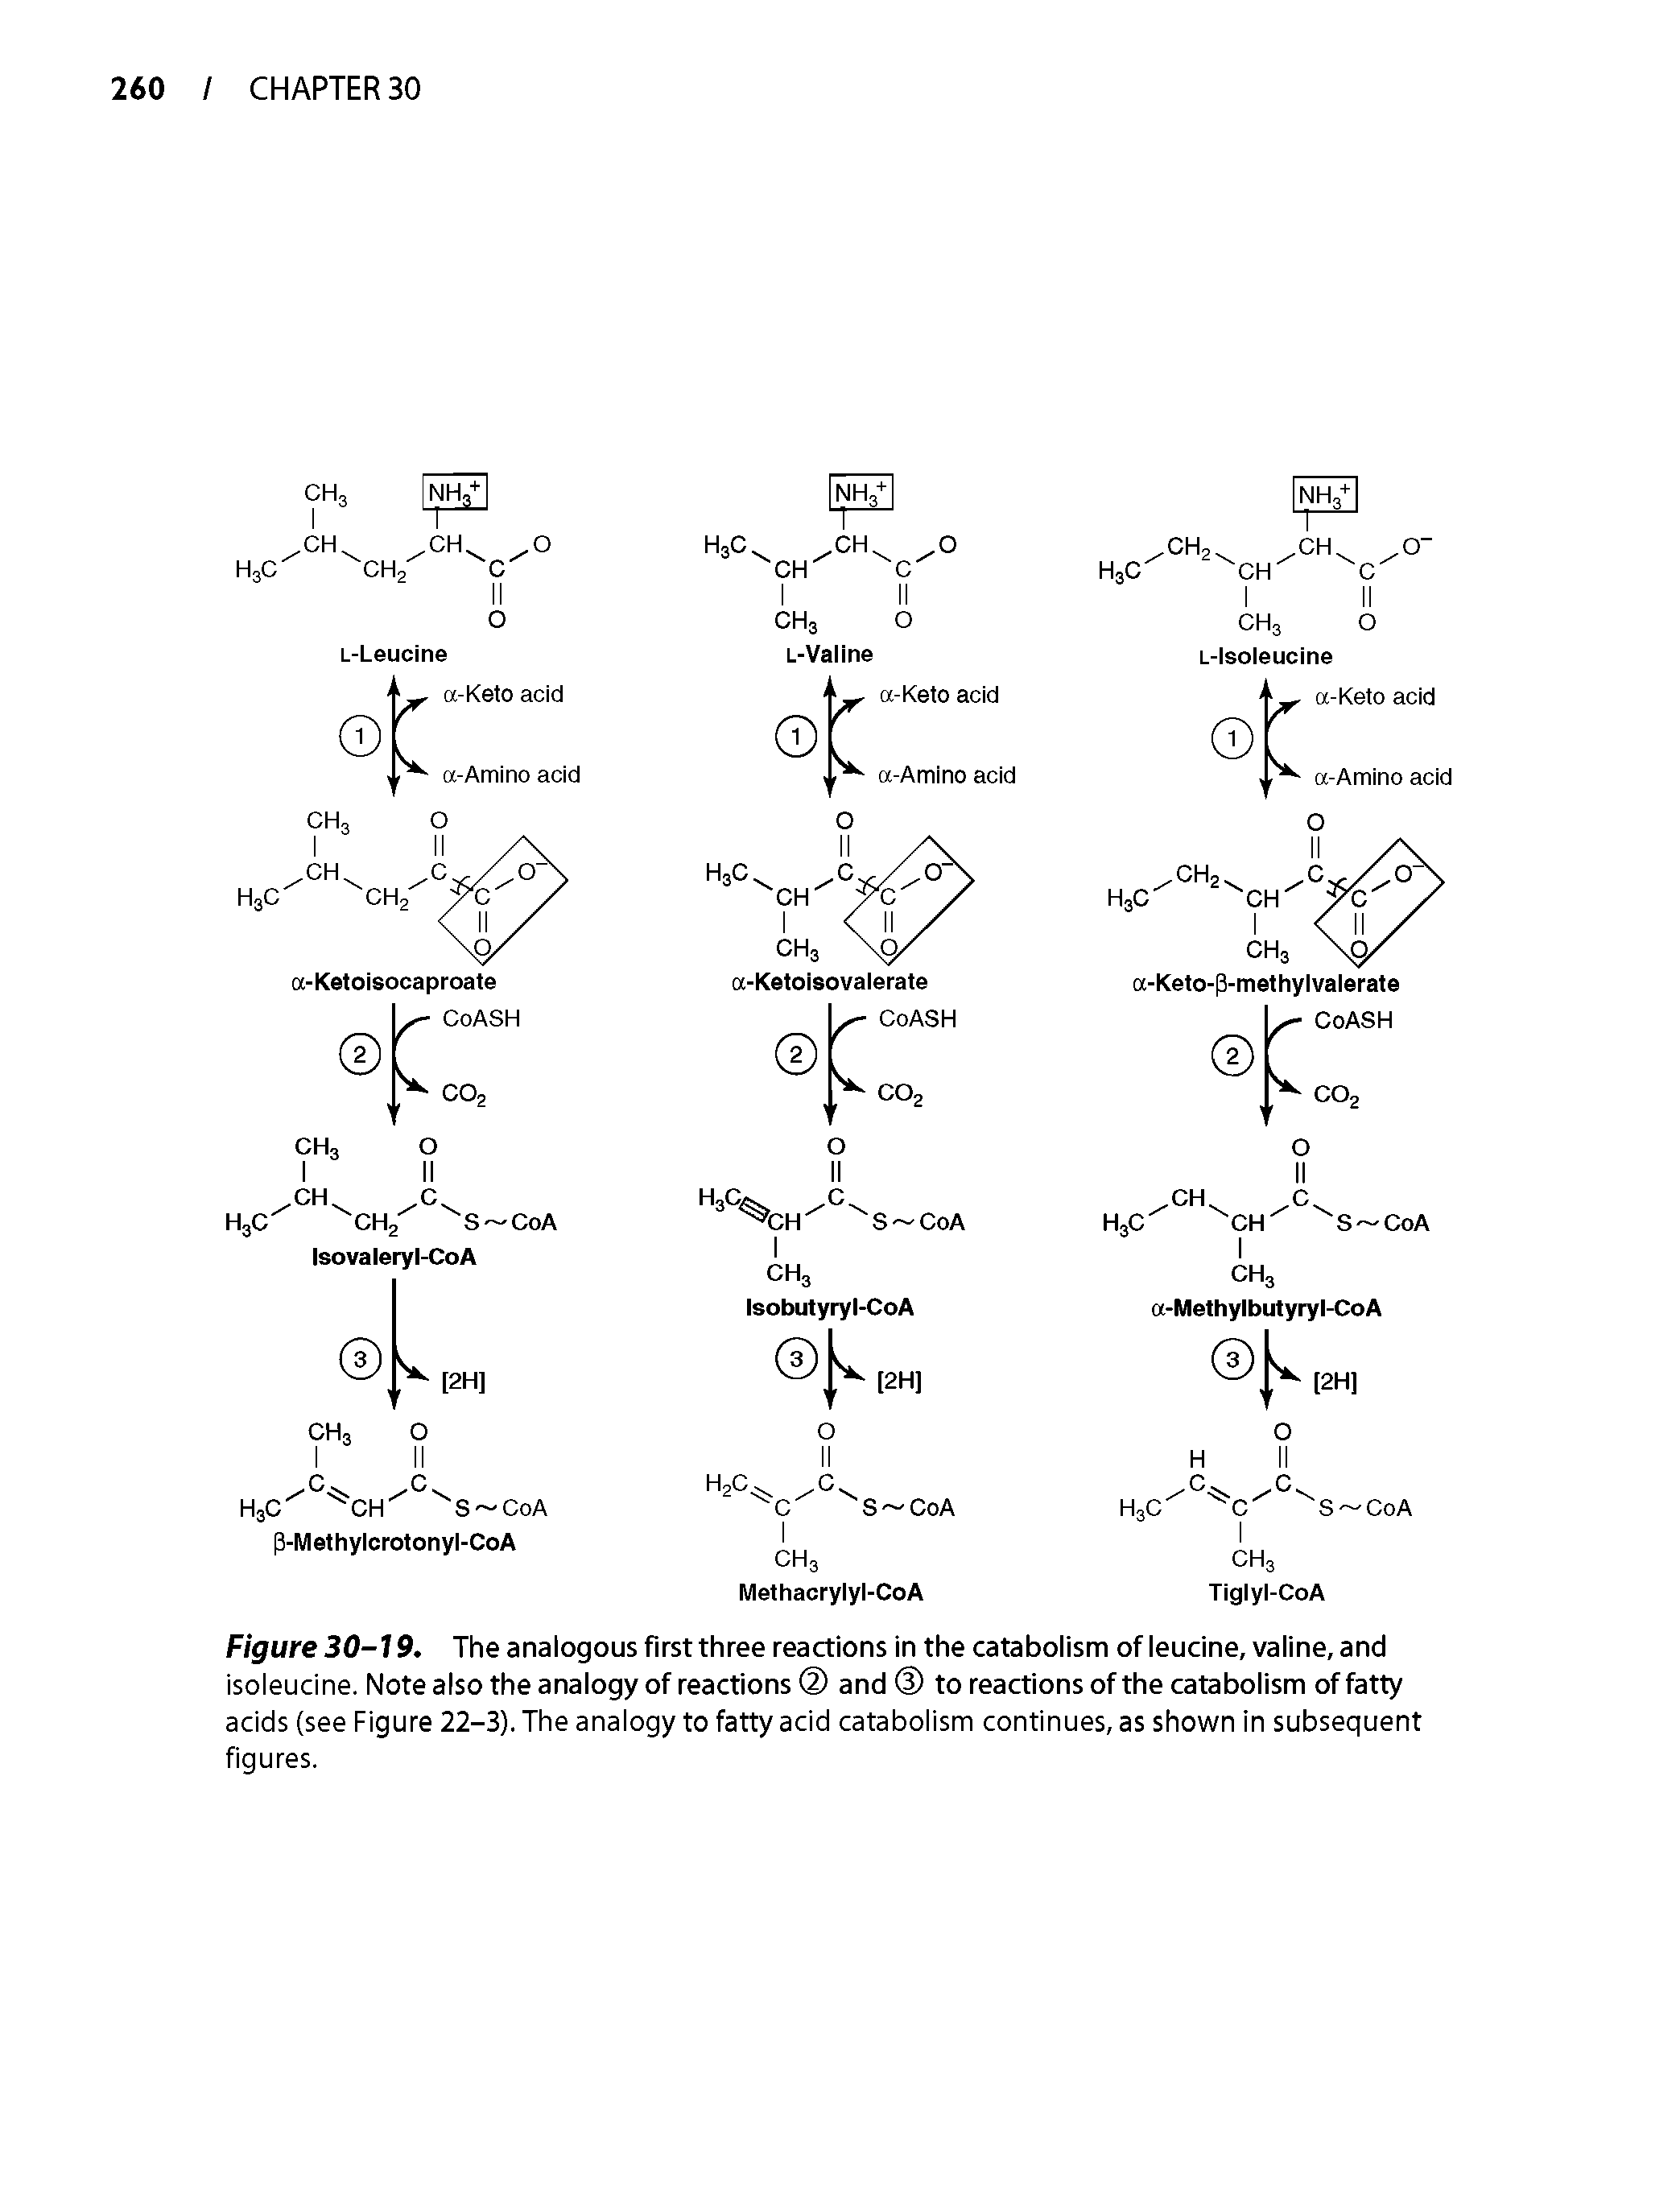 Figure 30-19. The analogous first three reactions in the catabolism of leucine, valine, and isoleucine. Note also the analogy of reactions and to reactions of the catabolism of fatty acids (see Figure 22-3). The analogy to fatty acid catabolism continues, as shown in subsequent figures.